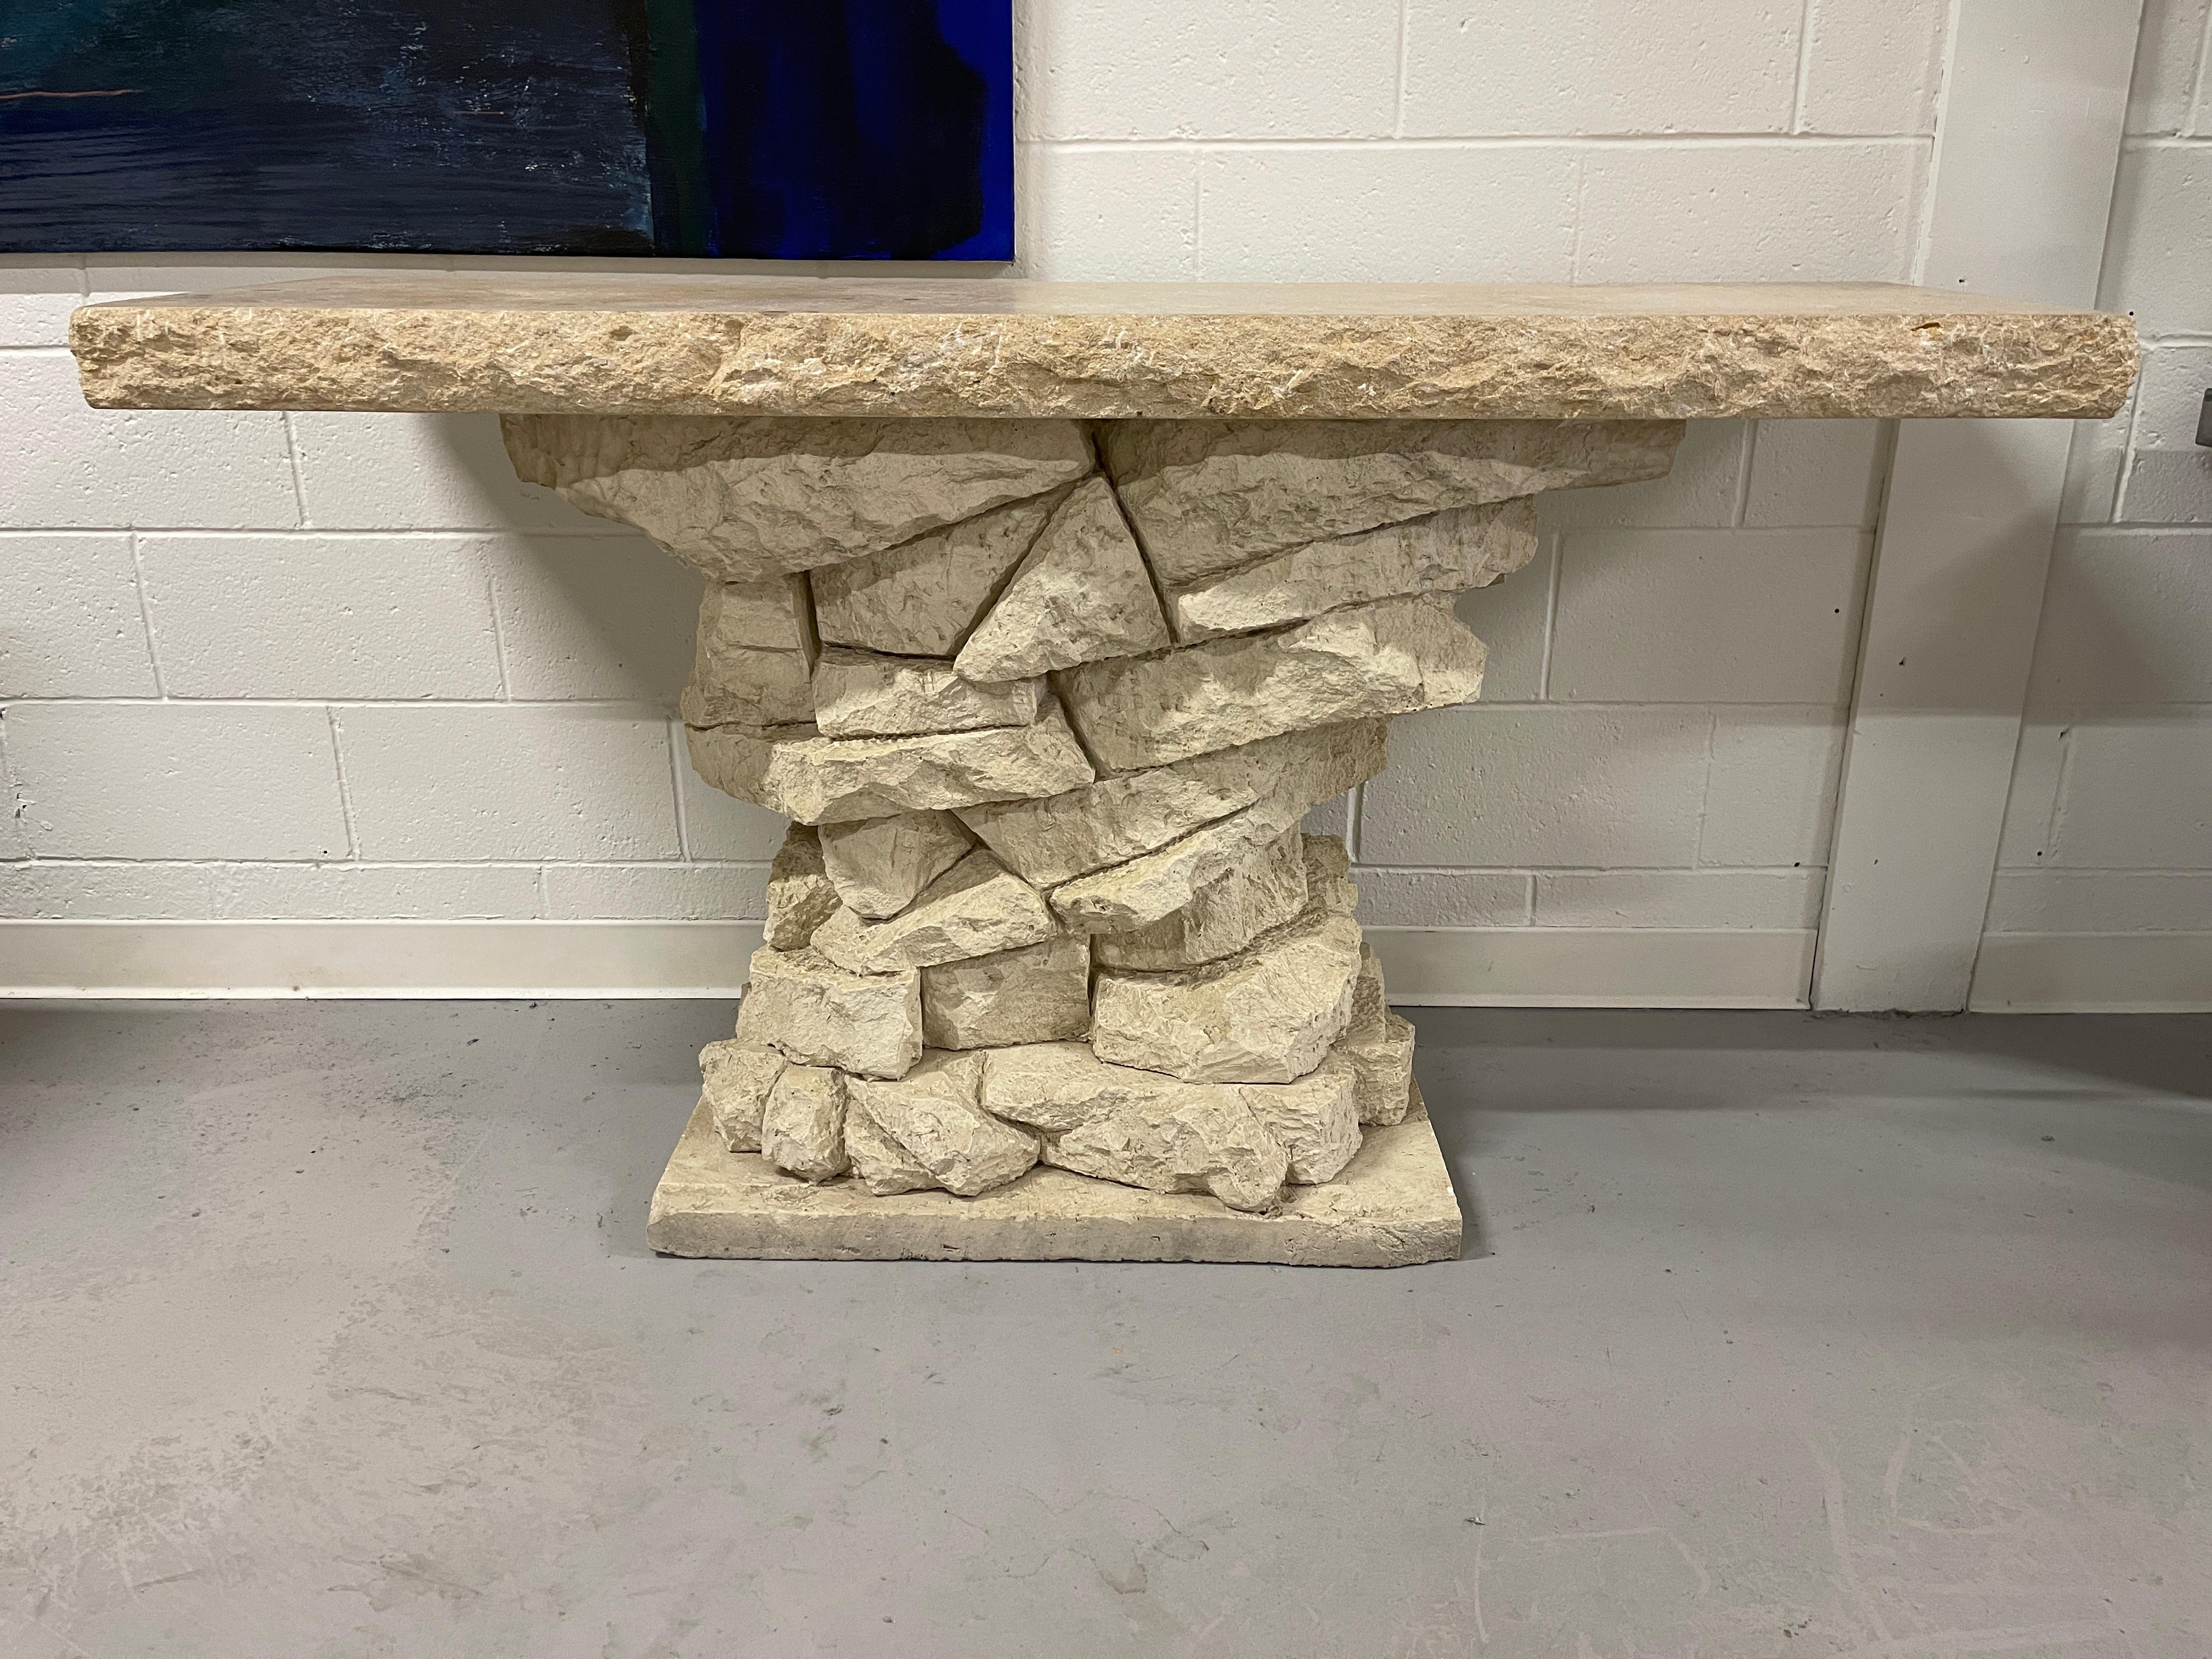 Wonderful faux stacked stone console table. The top is stone and extremely heavy. The base is some sort of poured or cast plaster. In good condition although there are some minor chips to the base under the overhang of the top. Some marks to the top.